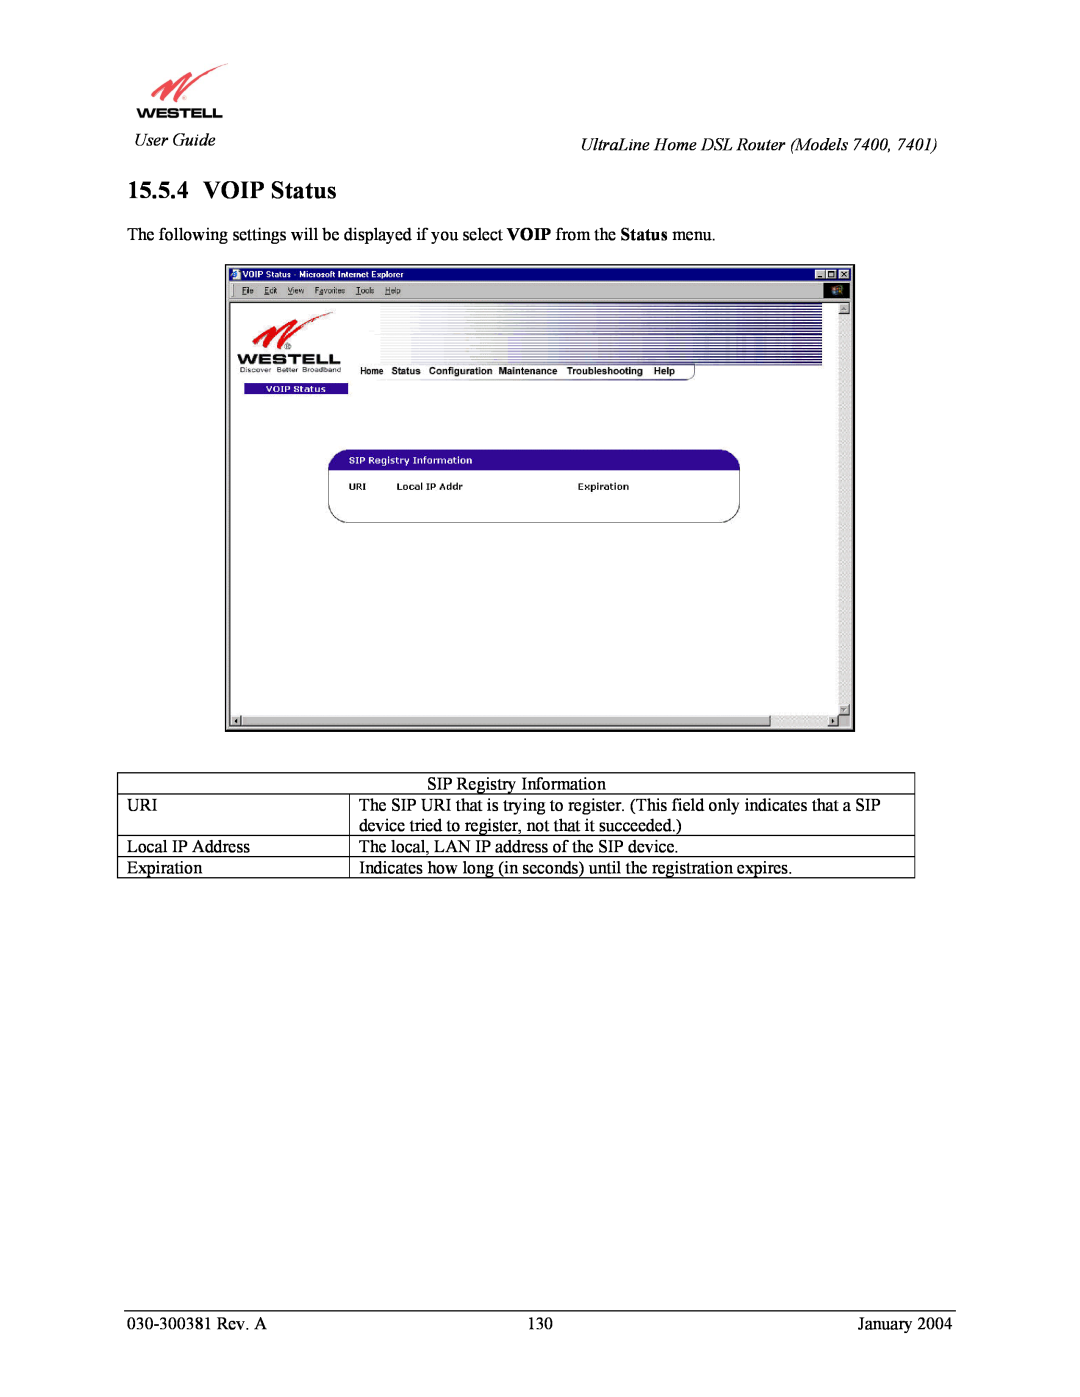 Westell Technologies 7401, 7400 manual VOIP Status 